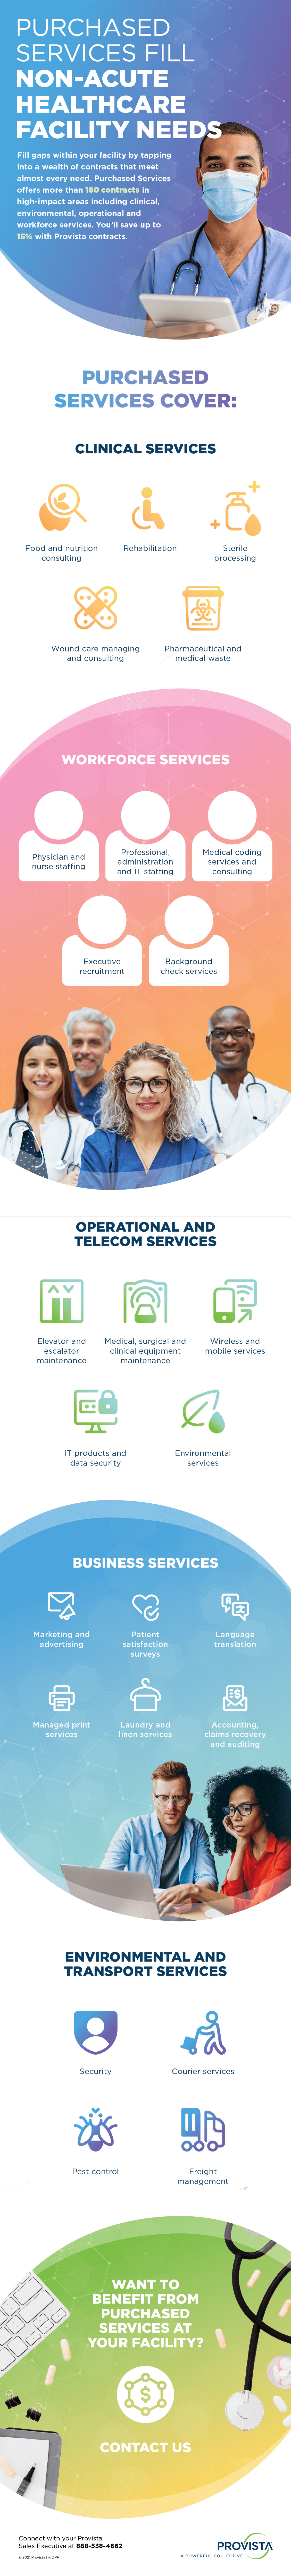 Infographic with healthcare workers smiling, work from home workers, stethoscope, medicine, clipboard, icons of magnify glass and apple, handicap icon, cleaning spray bottle, bandaids, and technology icons